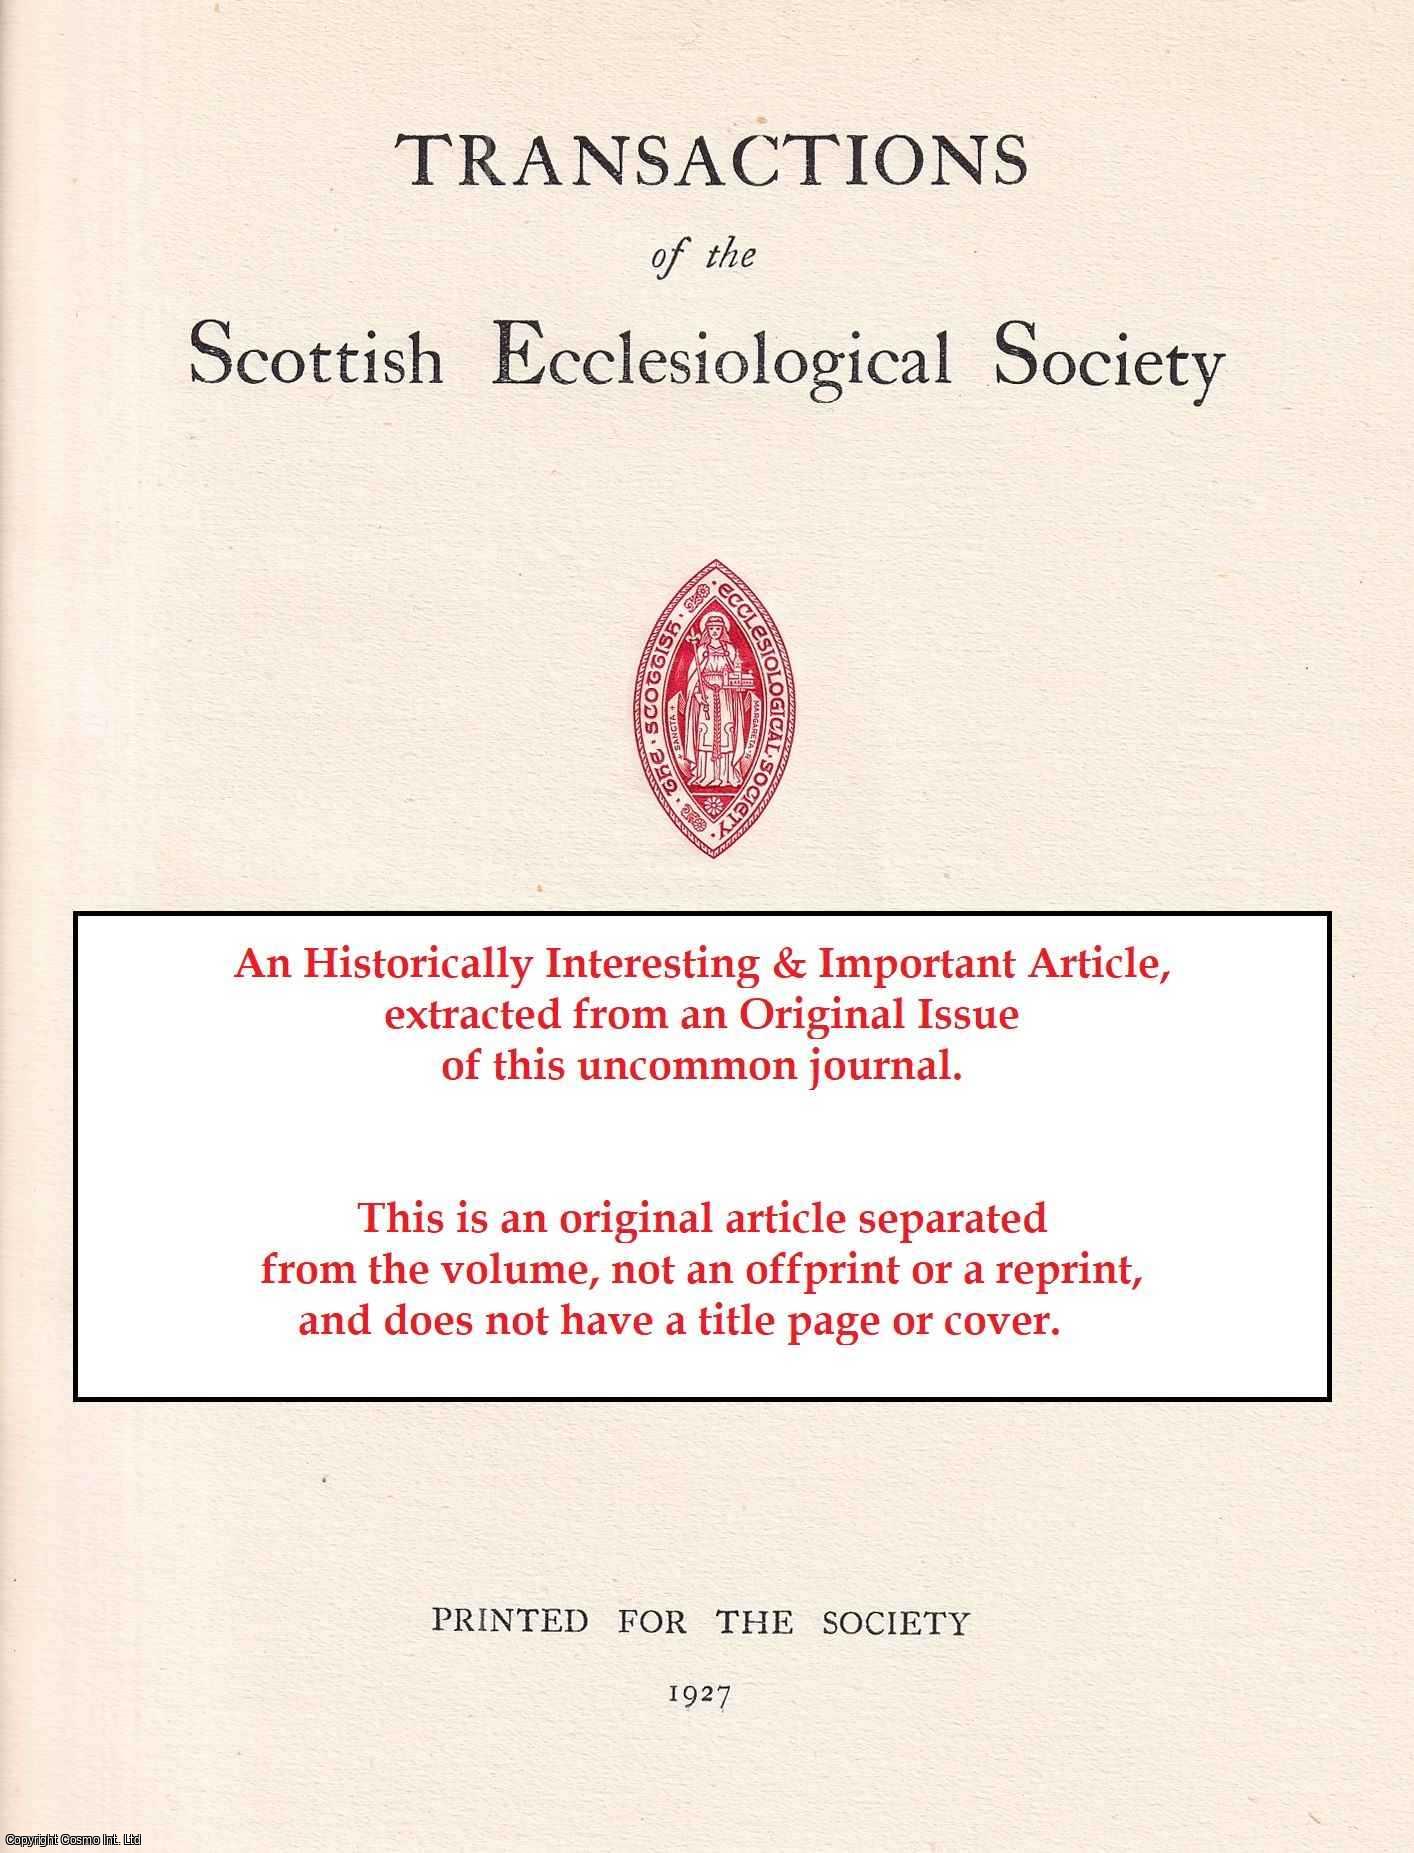 Alexander Hutcheson - The Cult of the Undressed Stone; a Study of Nature Worship. An original article from the Transactions of the Scottish Ecclesiological Society, 1923.